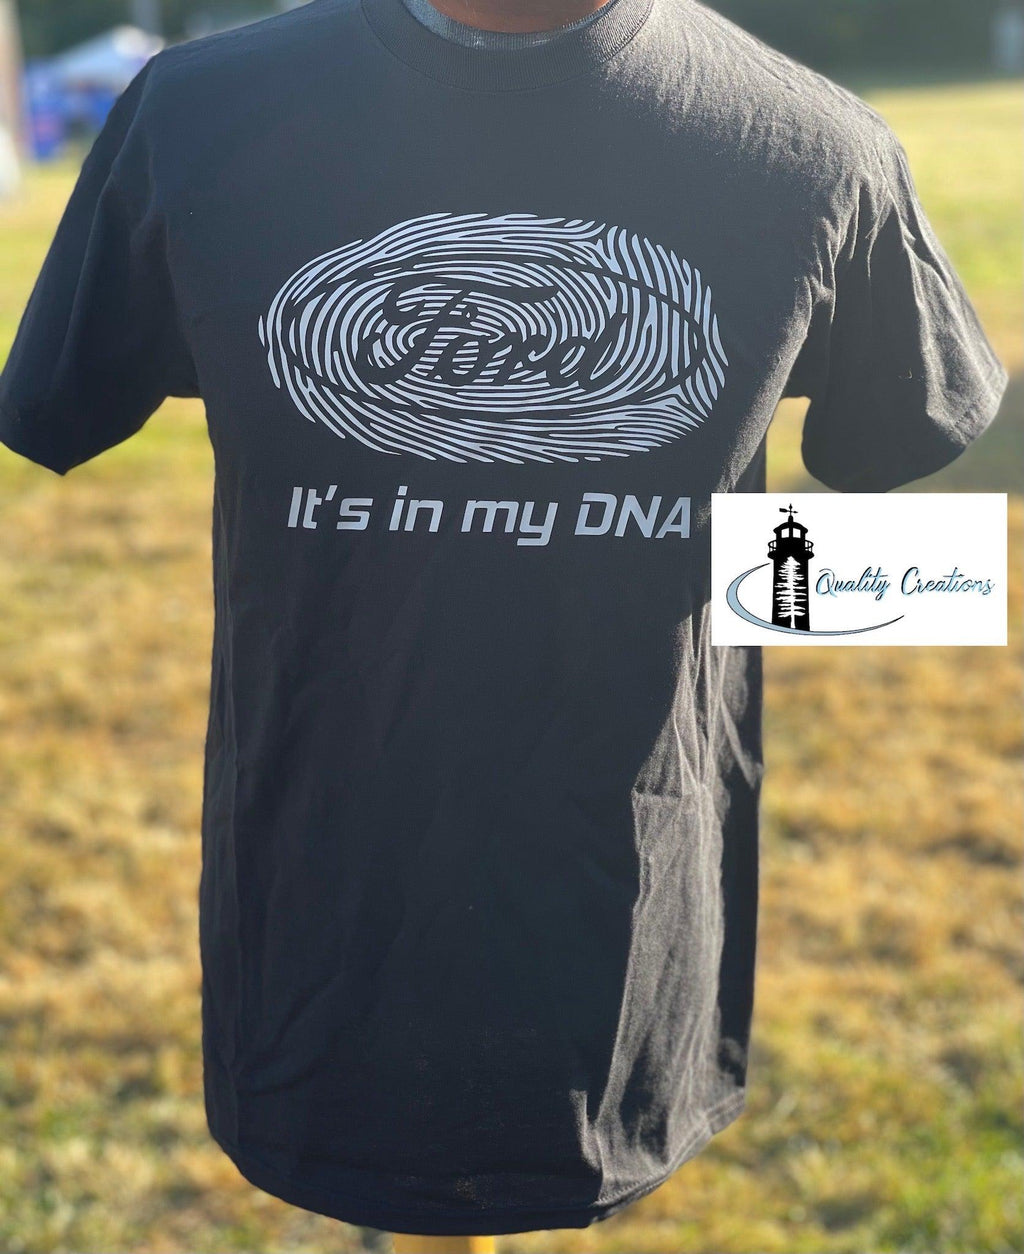 ford shirt its in my DNA fingerprint quality creations canada